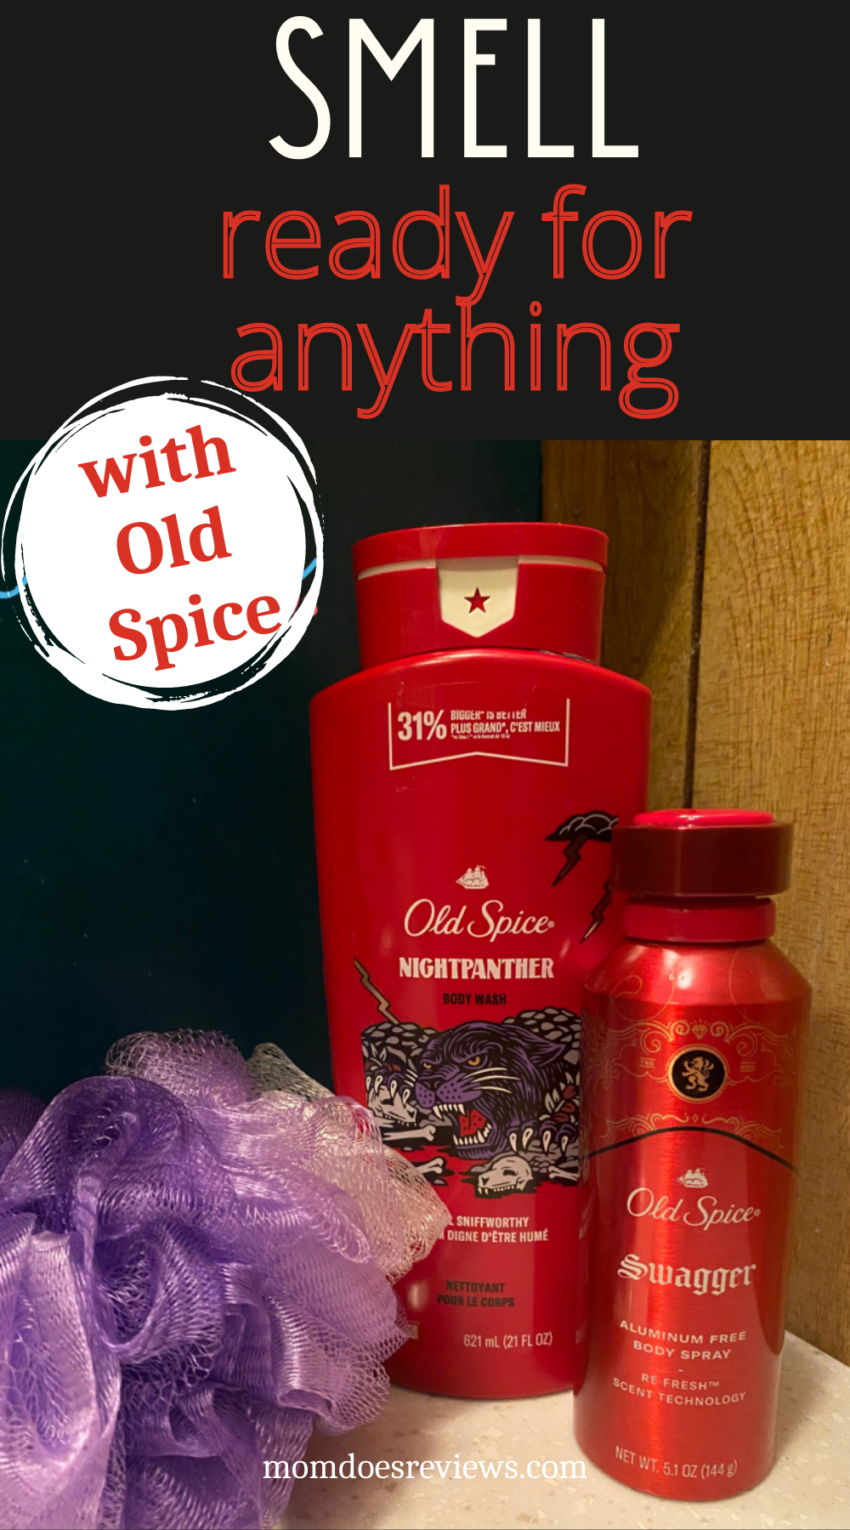 Smell Ready for anything with Old Spice